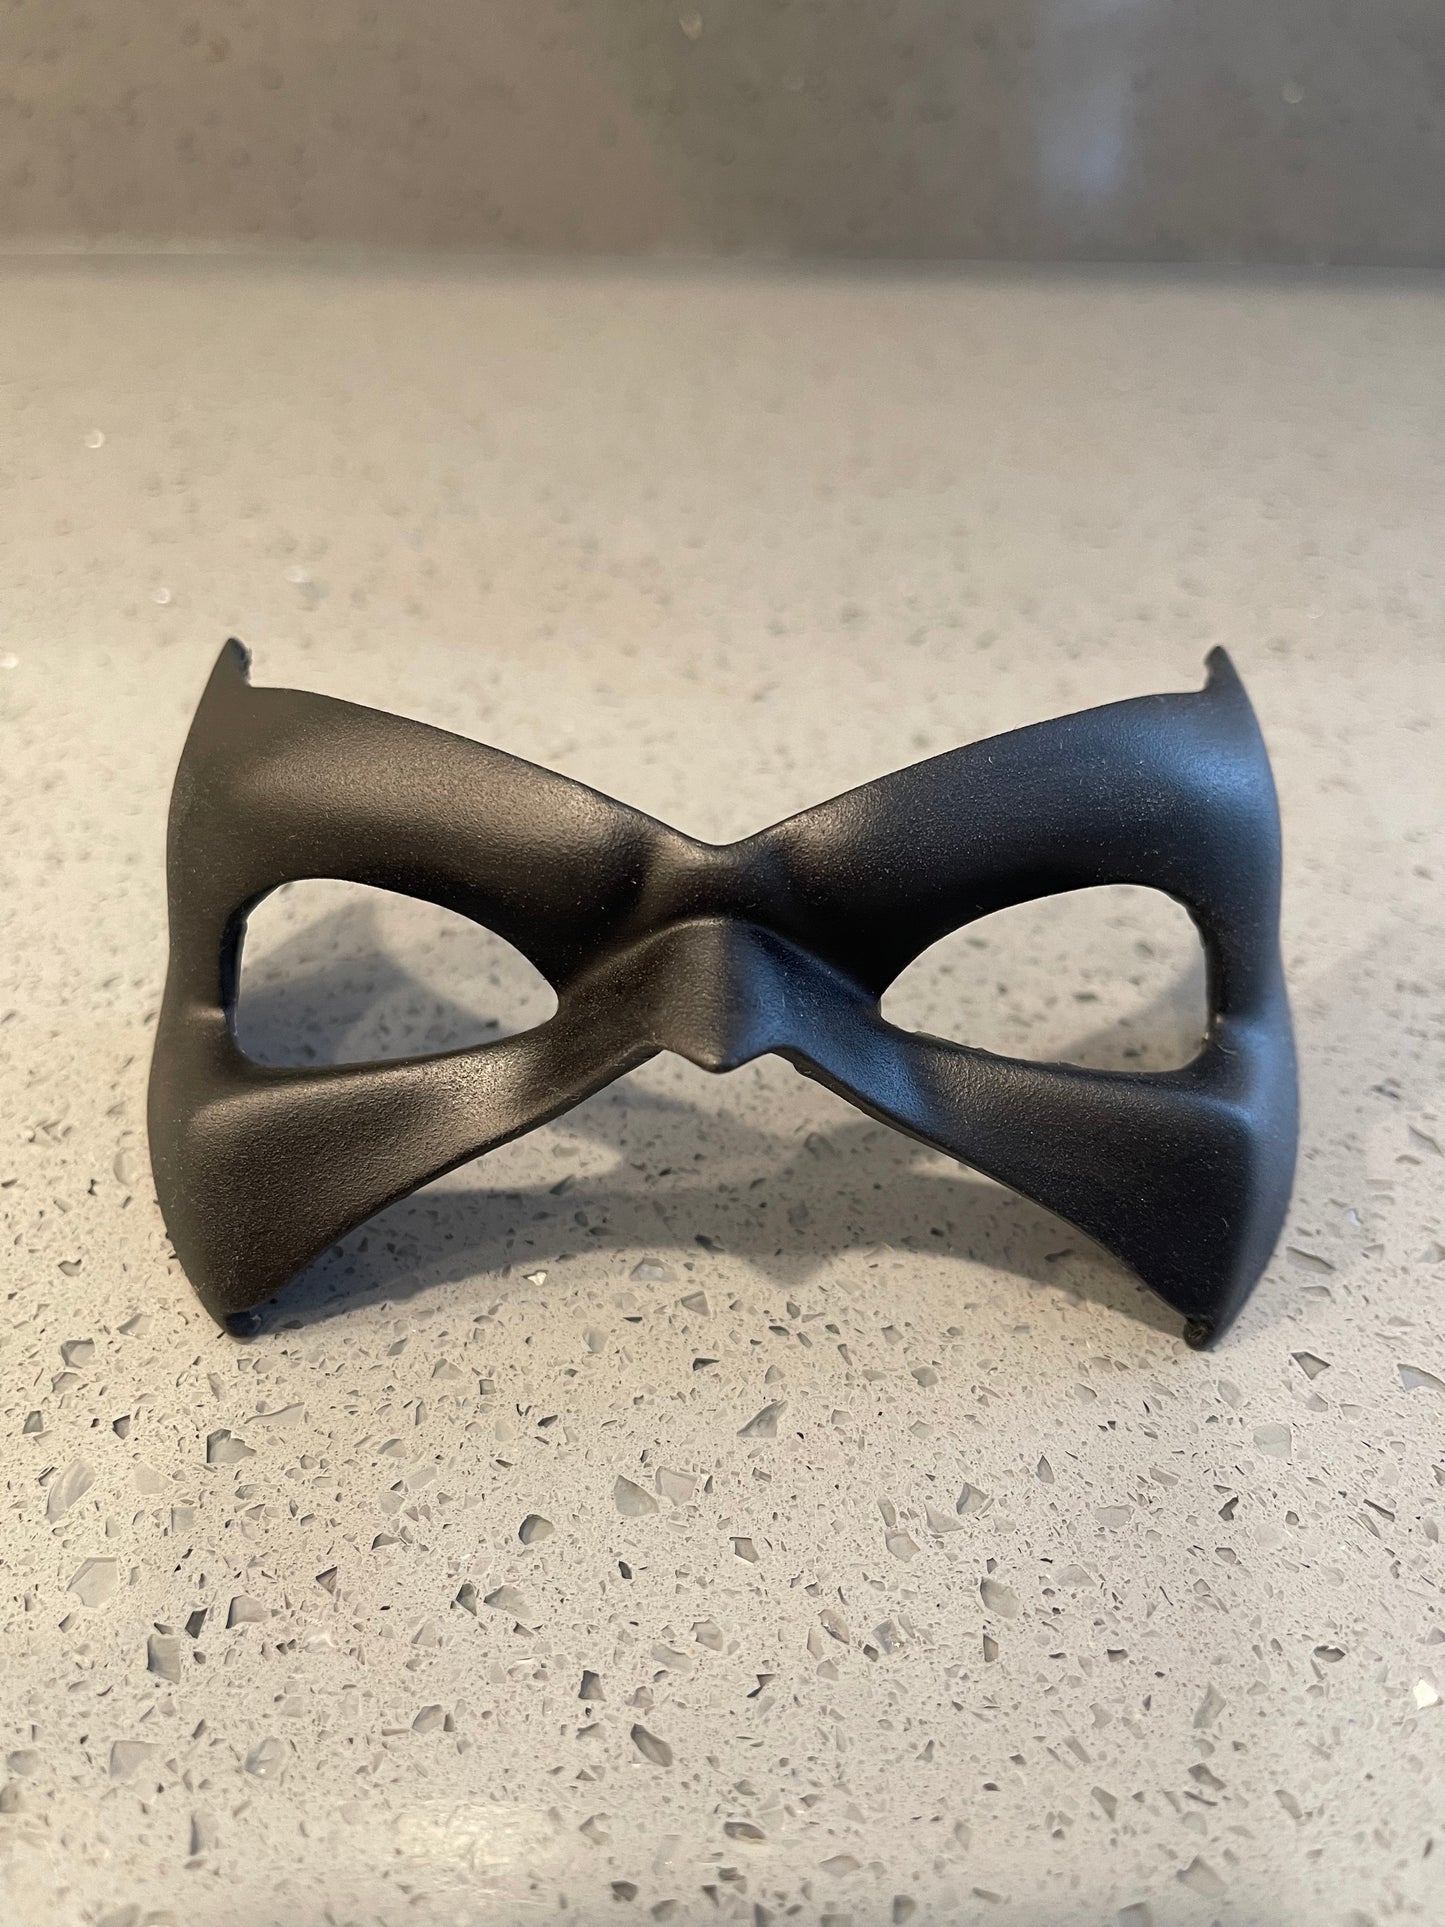 V1 Urethane Cosplay Domino Mask - Free Shipping to continental US